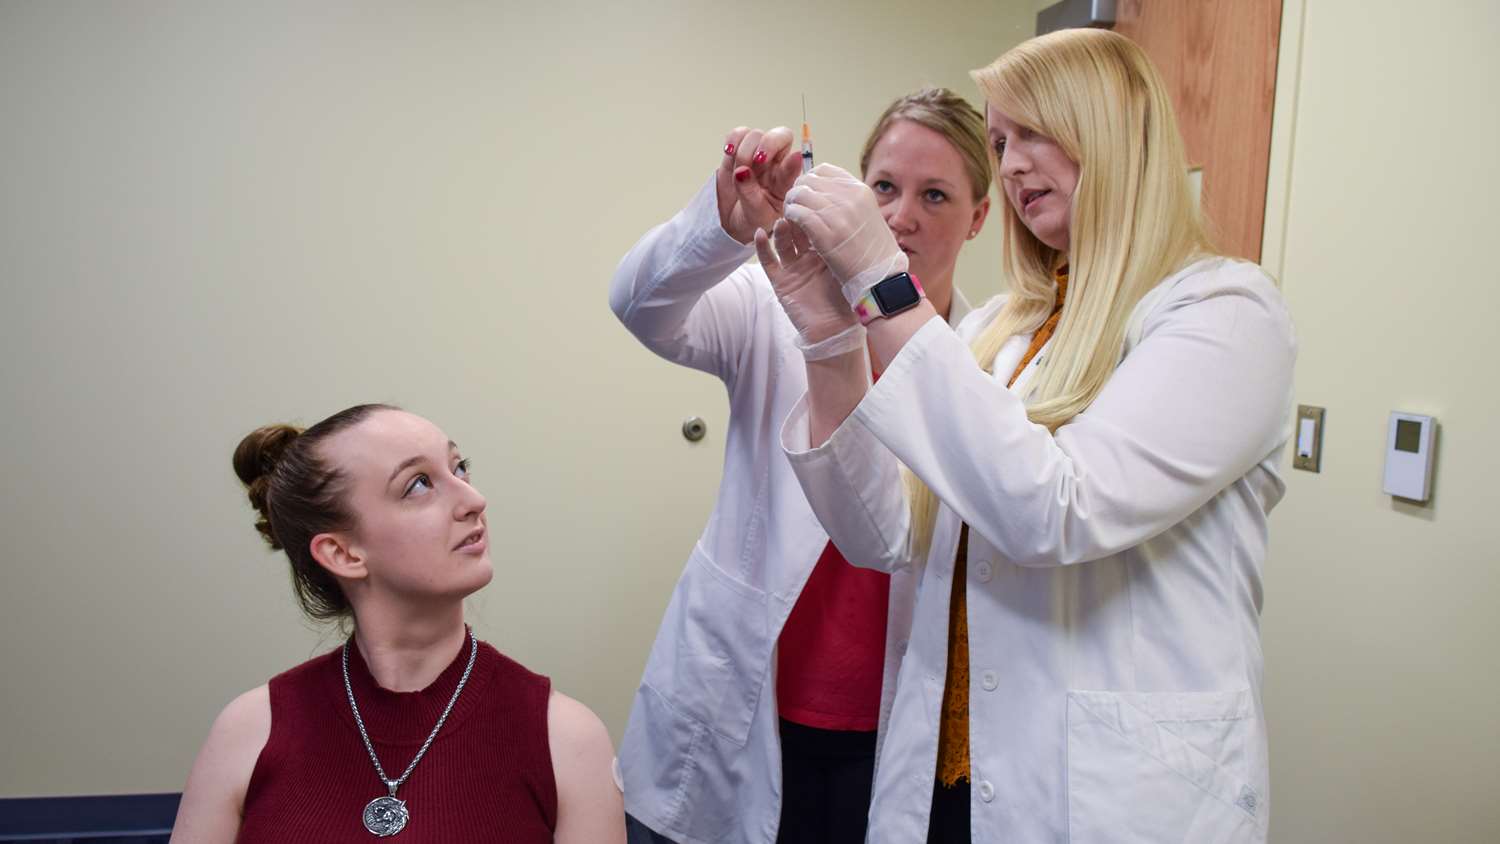 A female professor teaches to female students how to immunize a patient.